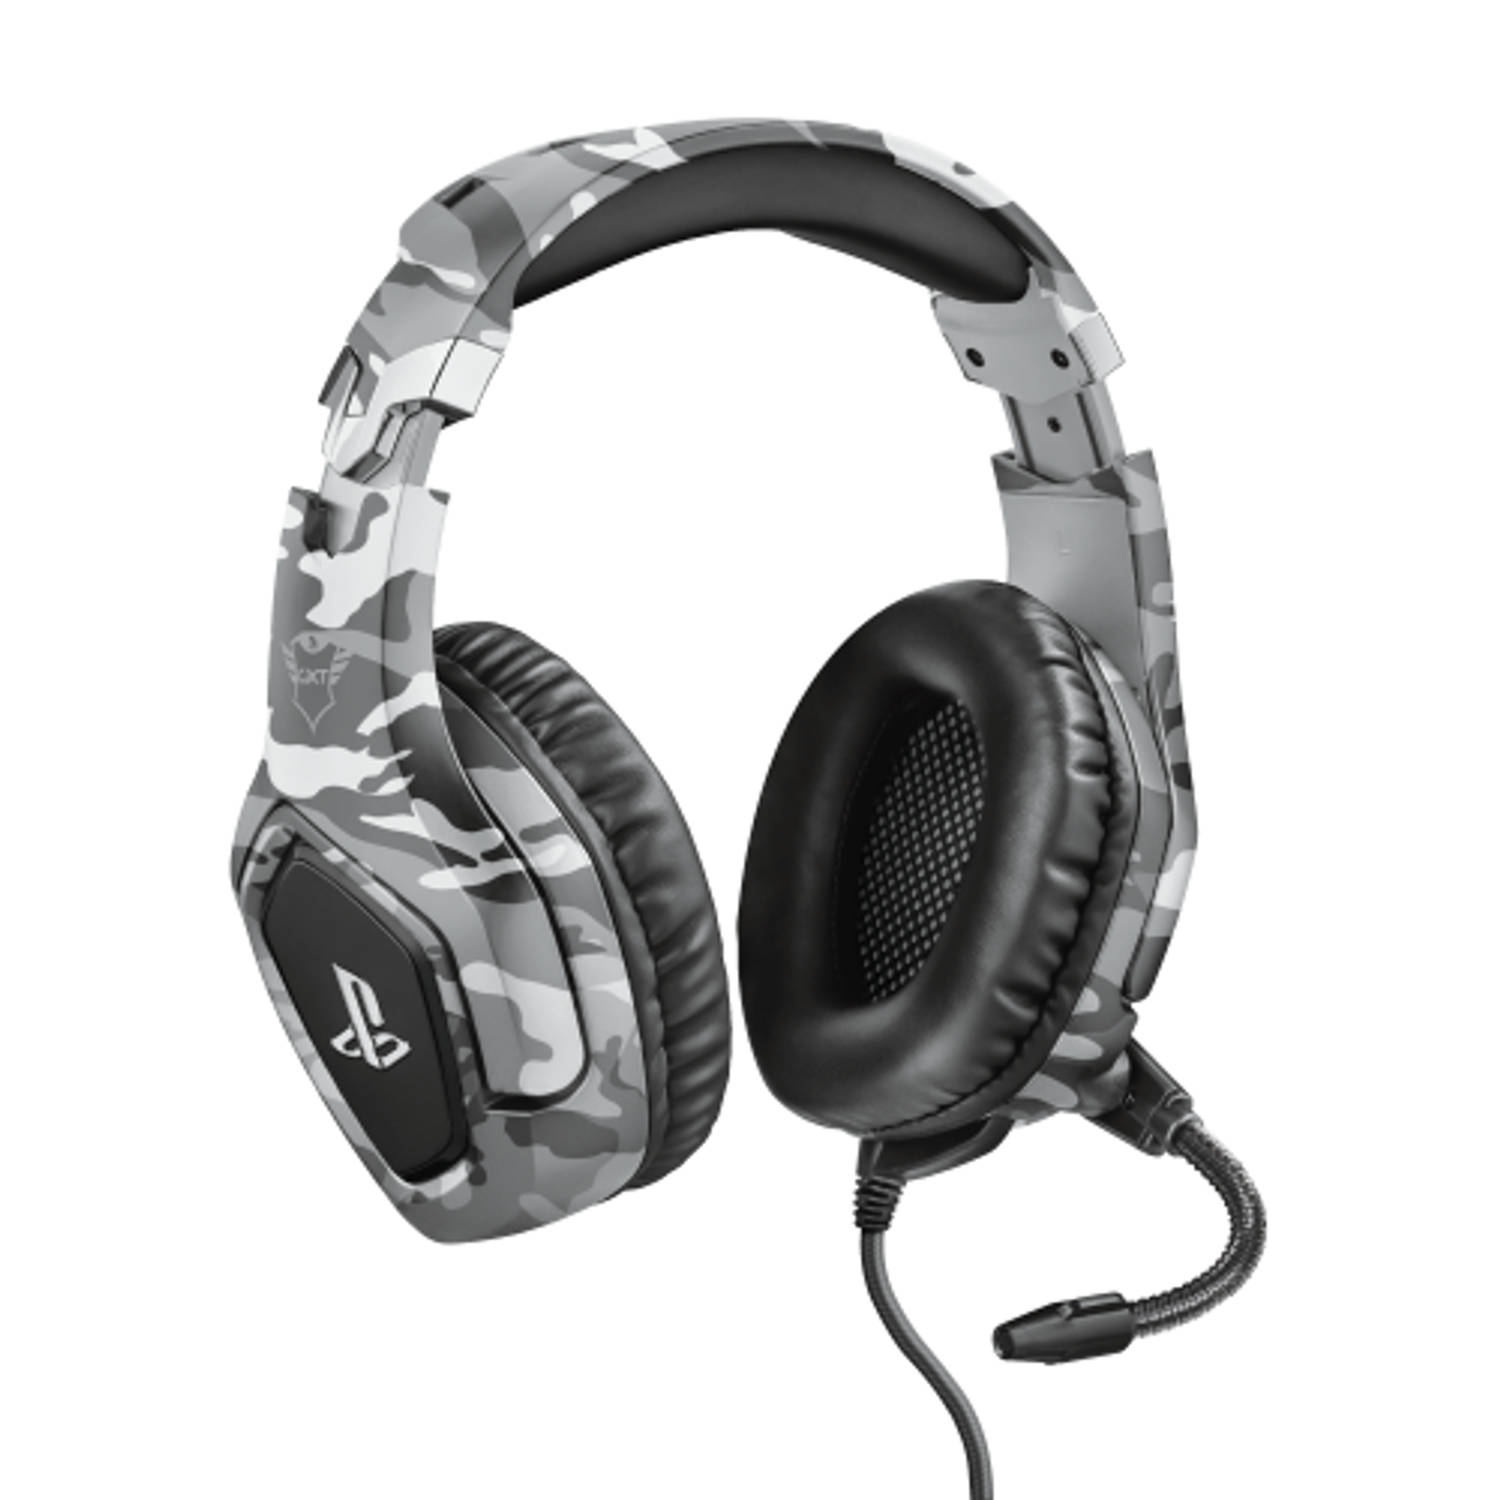 TRUST GXT 488 Forze PS4 Gaming Headset PlayStation Camo grijs